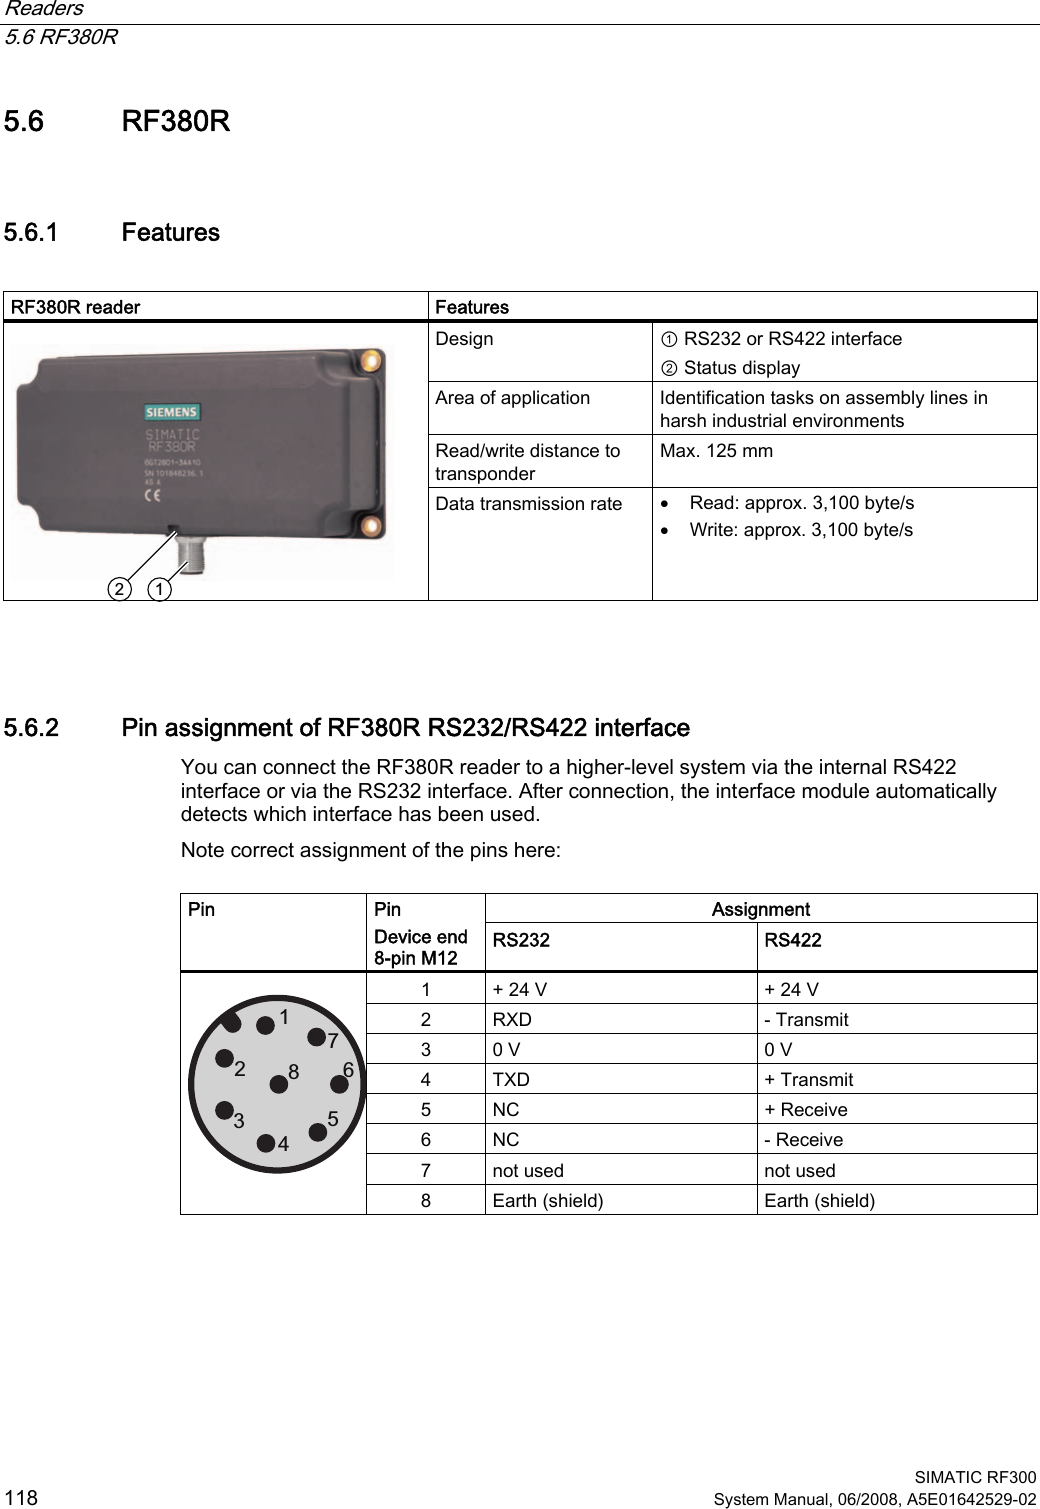 Readers   5.6 RF380R  SIMATIC RF300 118 System Manual, 06/2008, A5E01642529-02 5.6 RF380R 5.6.1 Features  RF380R reader  Features Design  ① RS232 or RS422 interface ② Status display Area of application  Identification tasks on assembly lines in harsh industrial environments Read/write distance to transponder Max. 125 mm   Data transmission rate  • Read: approx. 3,100 byte/s • Write: approx. 3,100 byte/s  5.6.2 Pin assignment of RF380R RS232/RS422 interface You can connect the RF380R reader to a higher-level system via the internal RS422 interface or via the RS232 interface. After connection, the interface module automatically detects which interface has been used. Note correct assignment of the pins here:  Assignment Pin  Pin Device end 8-pin M12  RS232  RS422 1  + 24 V  + 24 V 2  RXD  - Transmit 3  0 V  0 V 4  TXD  + Transmit 5  NC  + Receive 6  NC  - Receive 7  not used  not used   8  Earth (shield)  Earth (shield)  